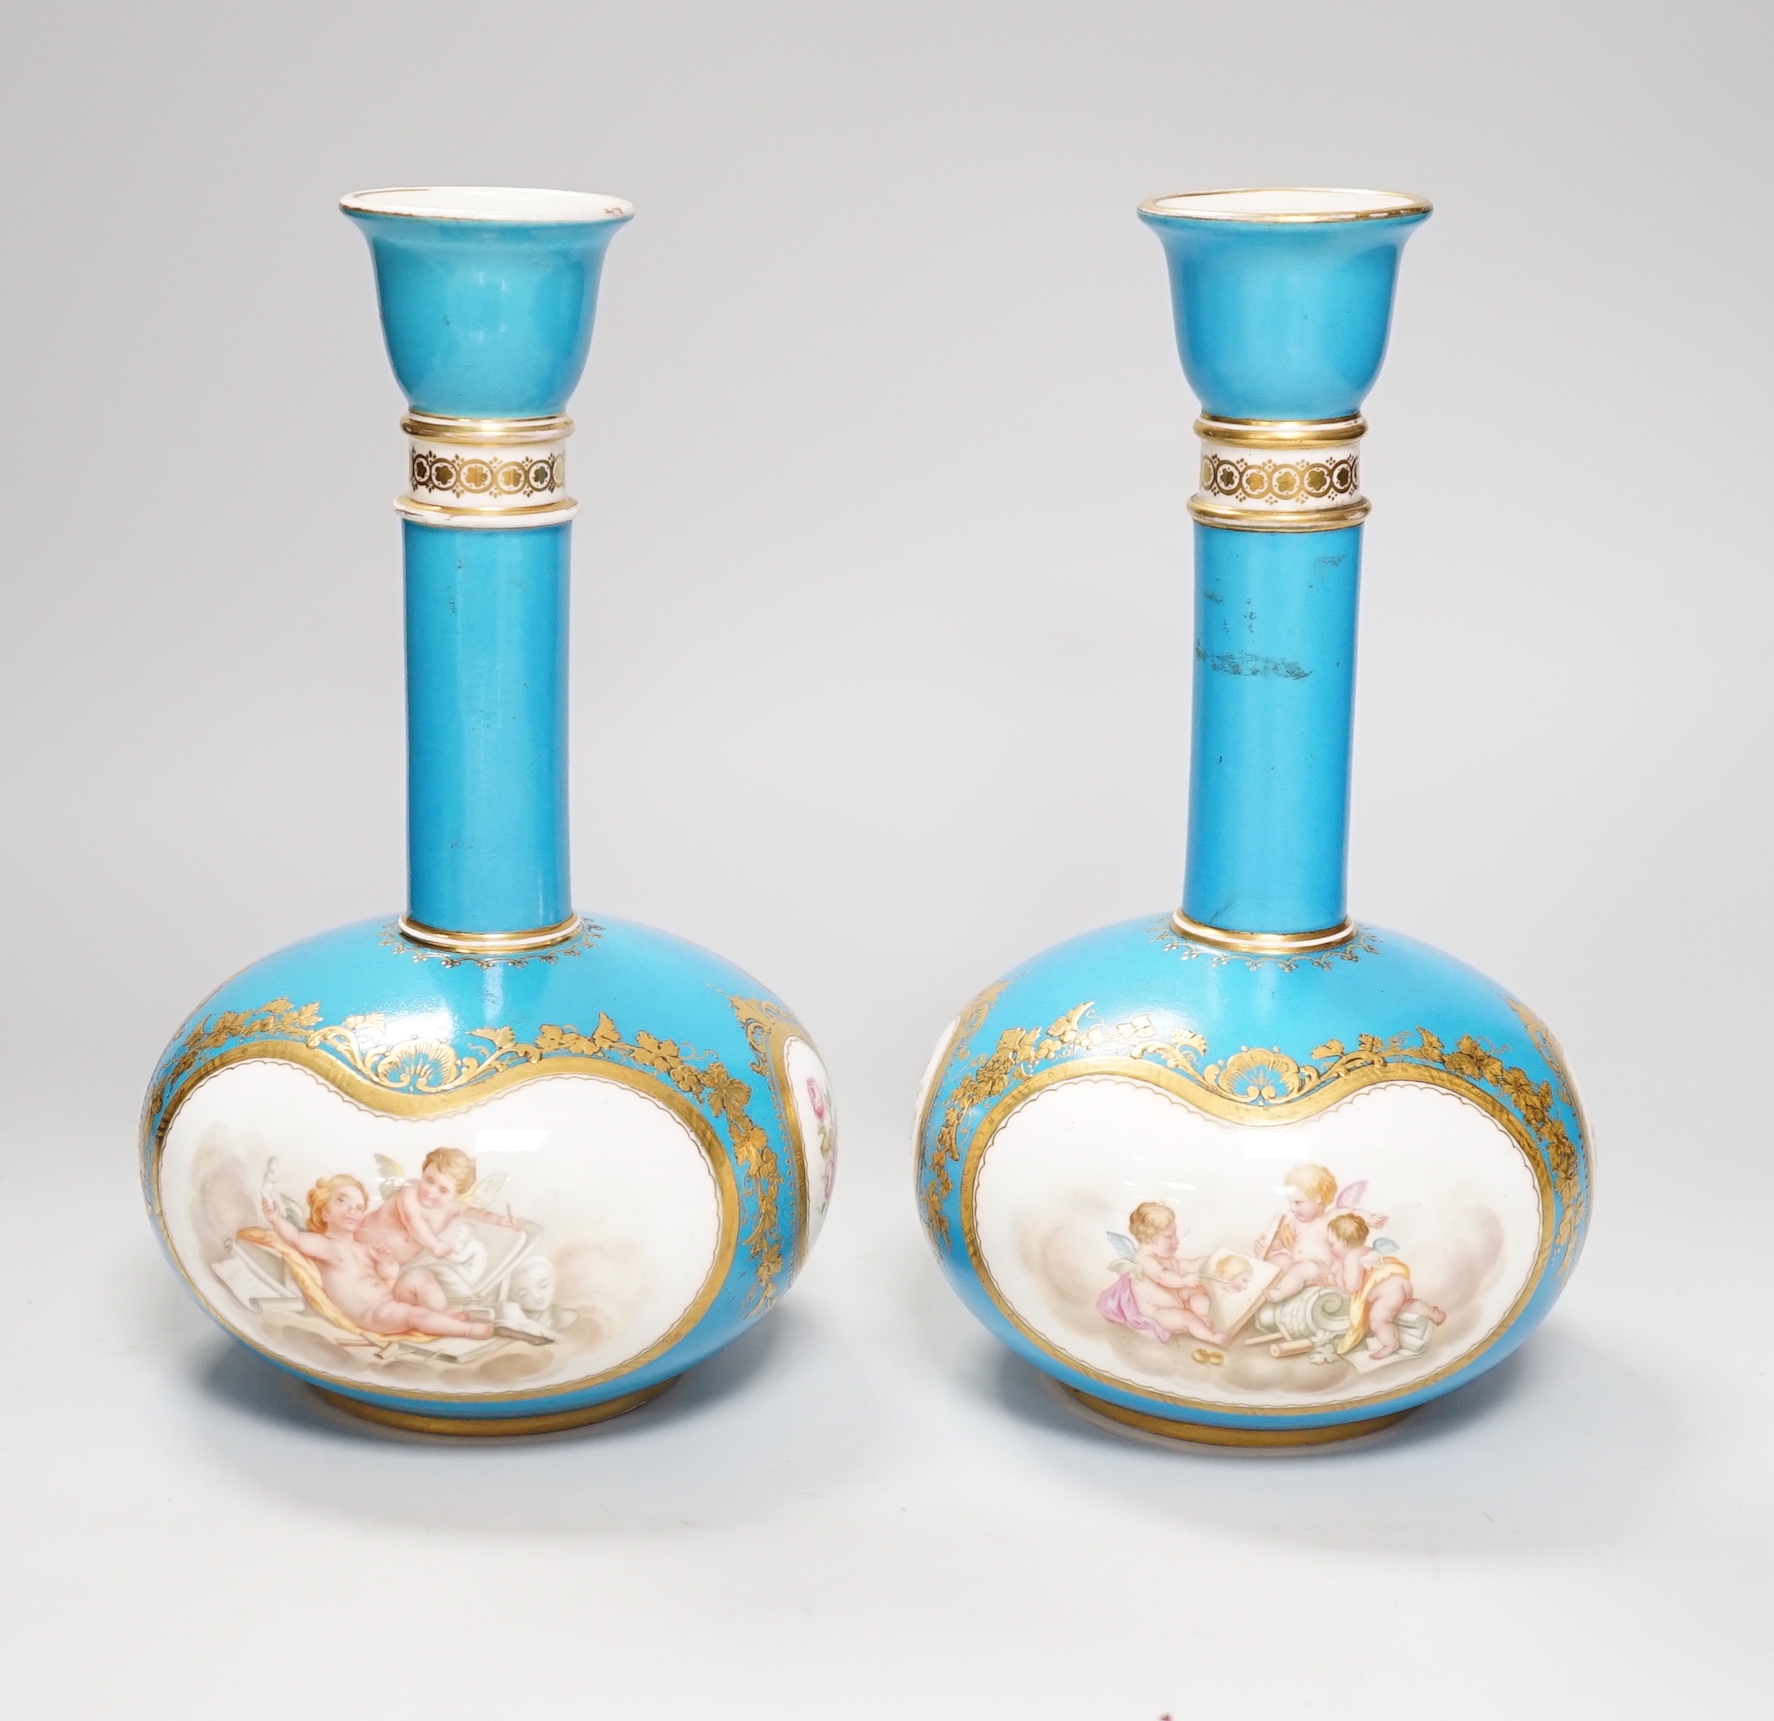 A pair of Coalport turquoise bottle vases, late 19th century, with putti and rose cartouche decoration, gilt CSN mark, 22cm high